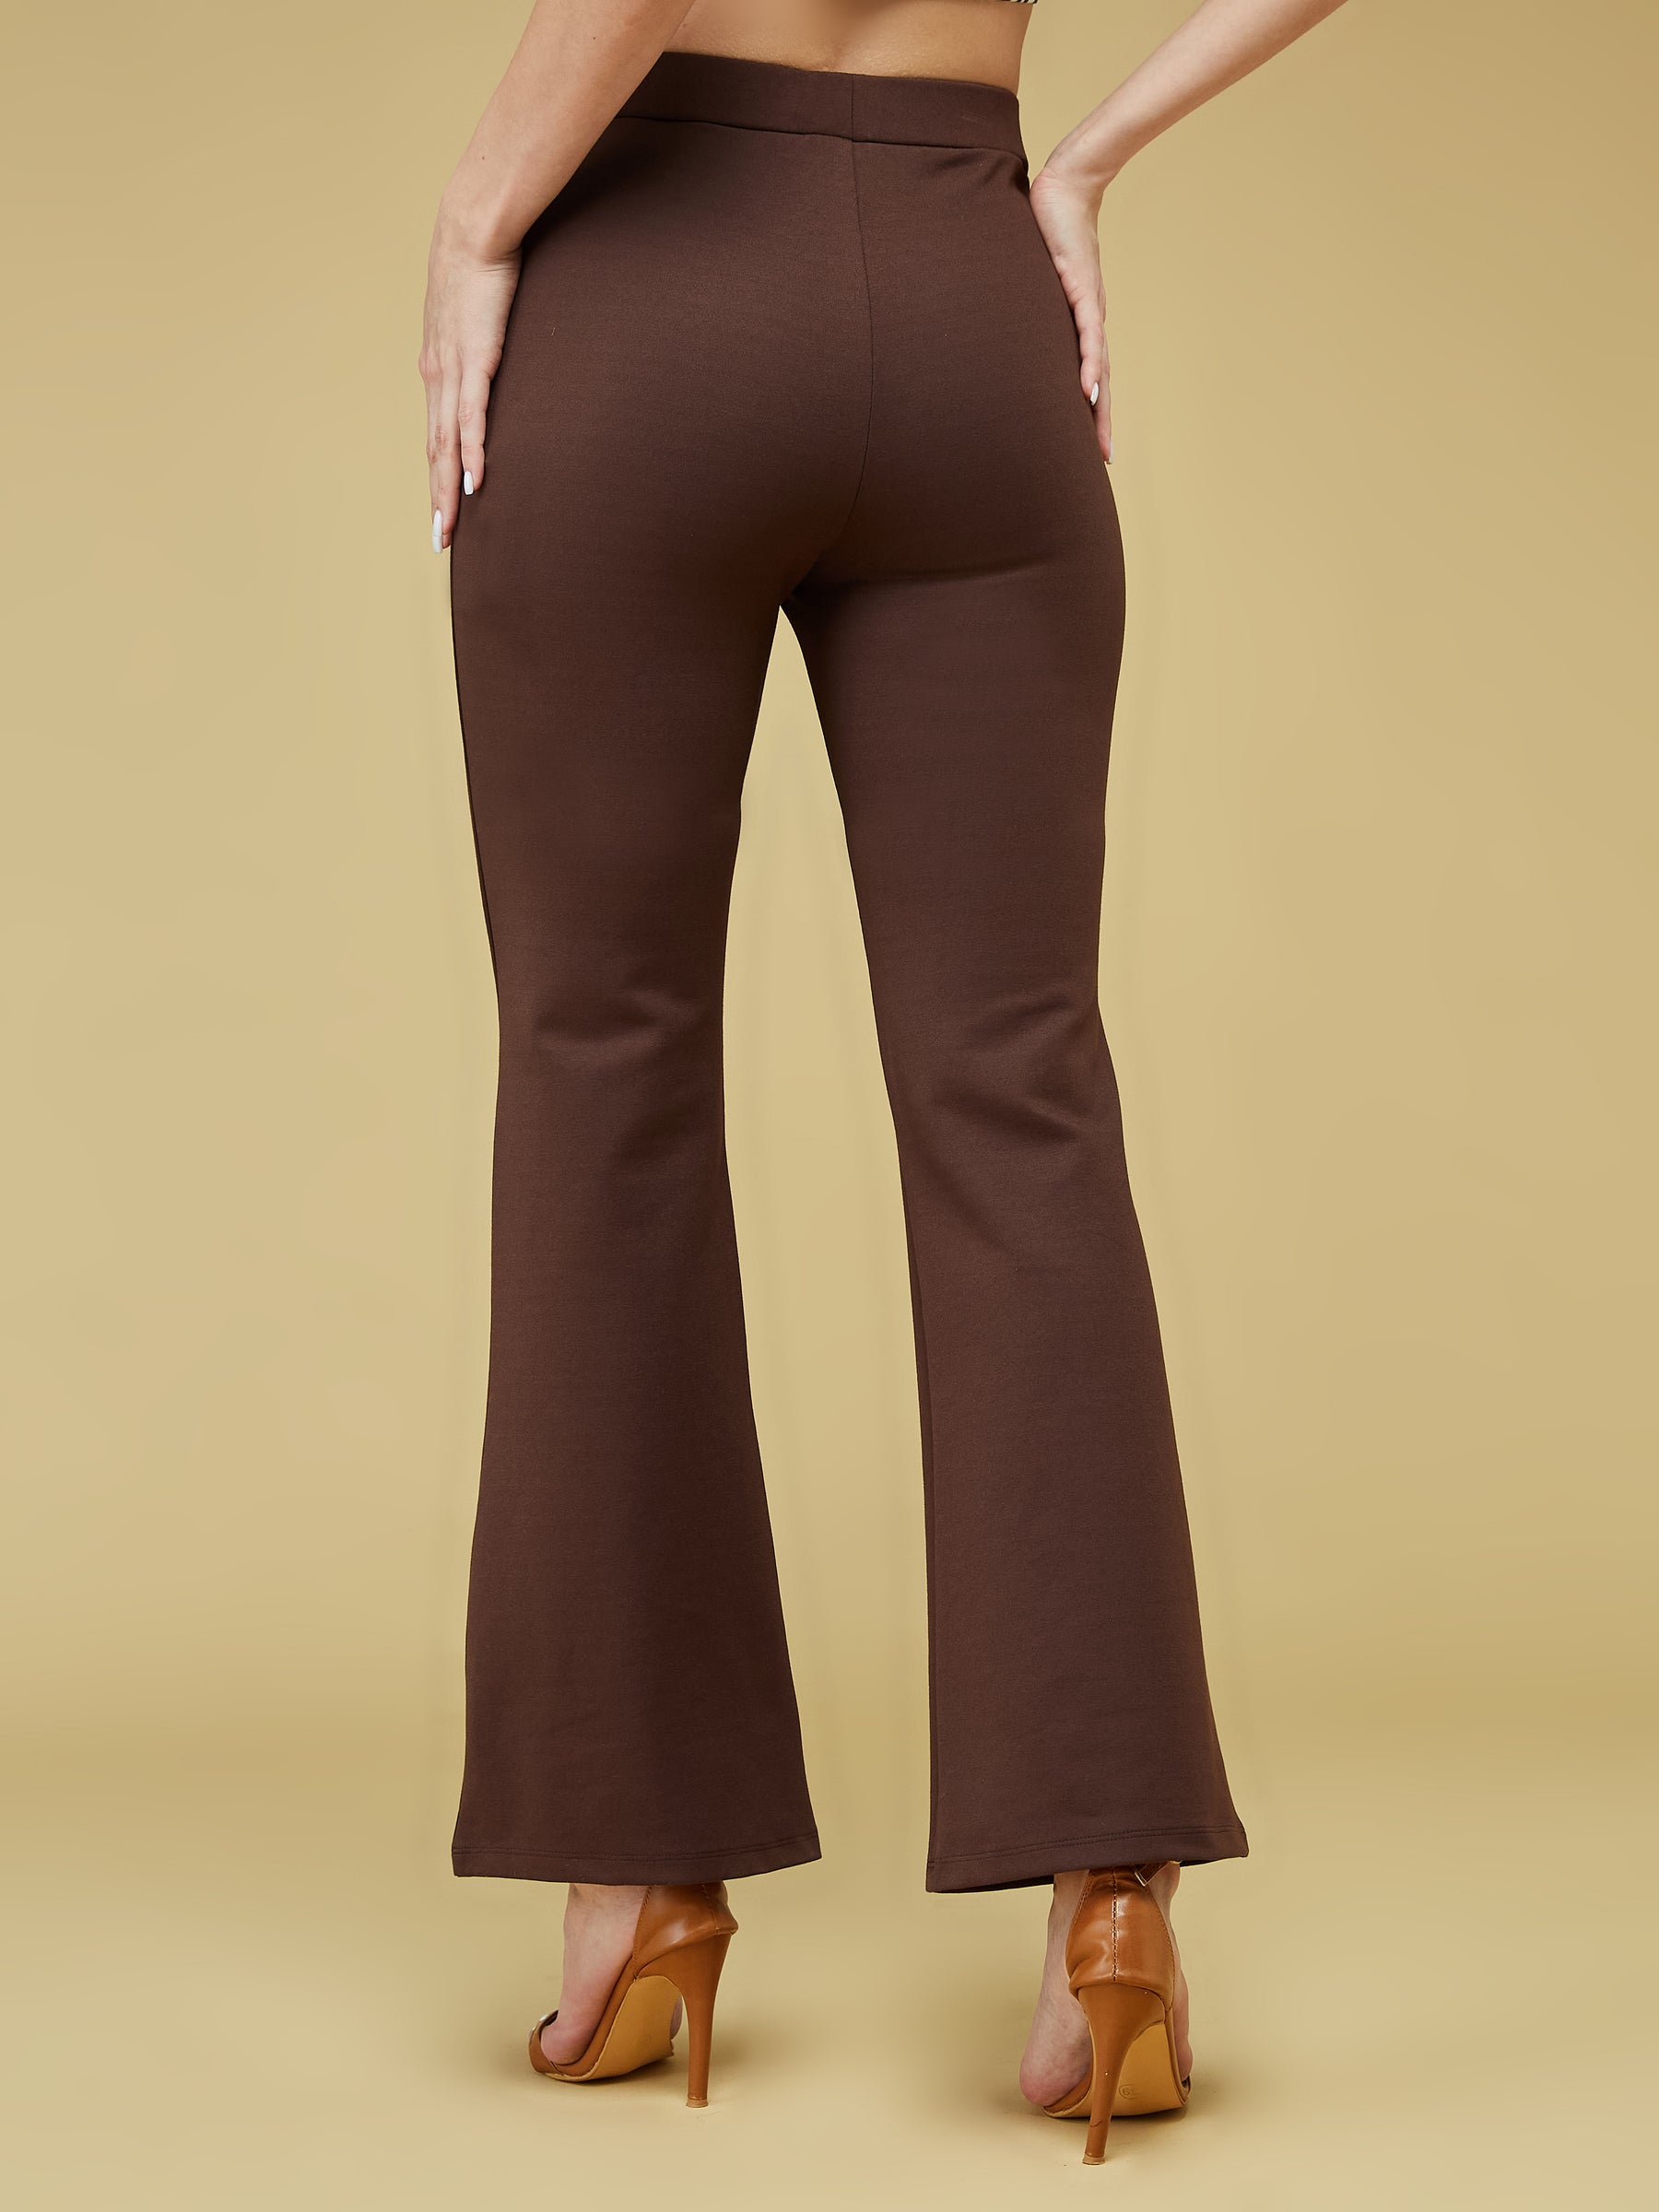 Coffee Solid With Pocket Legging Pant